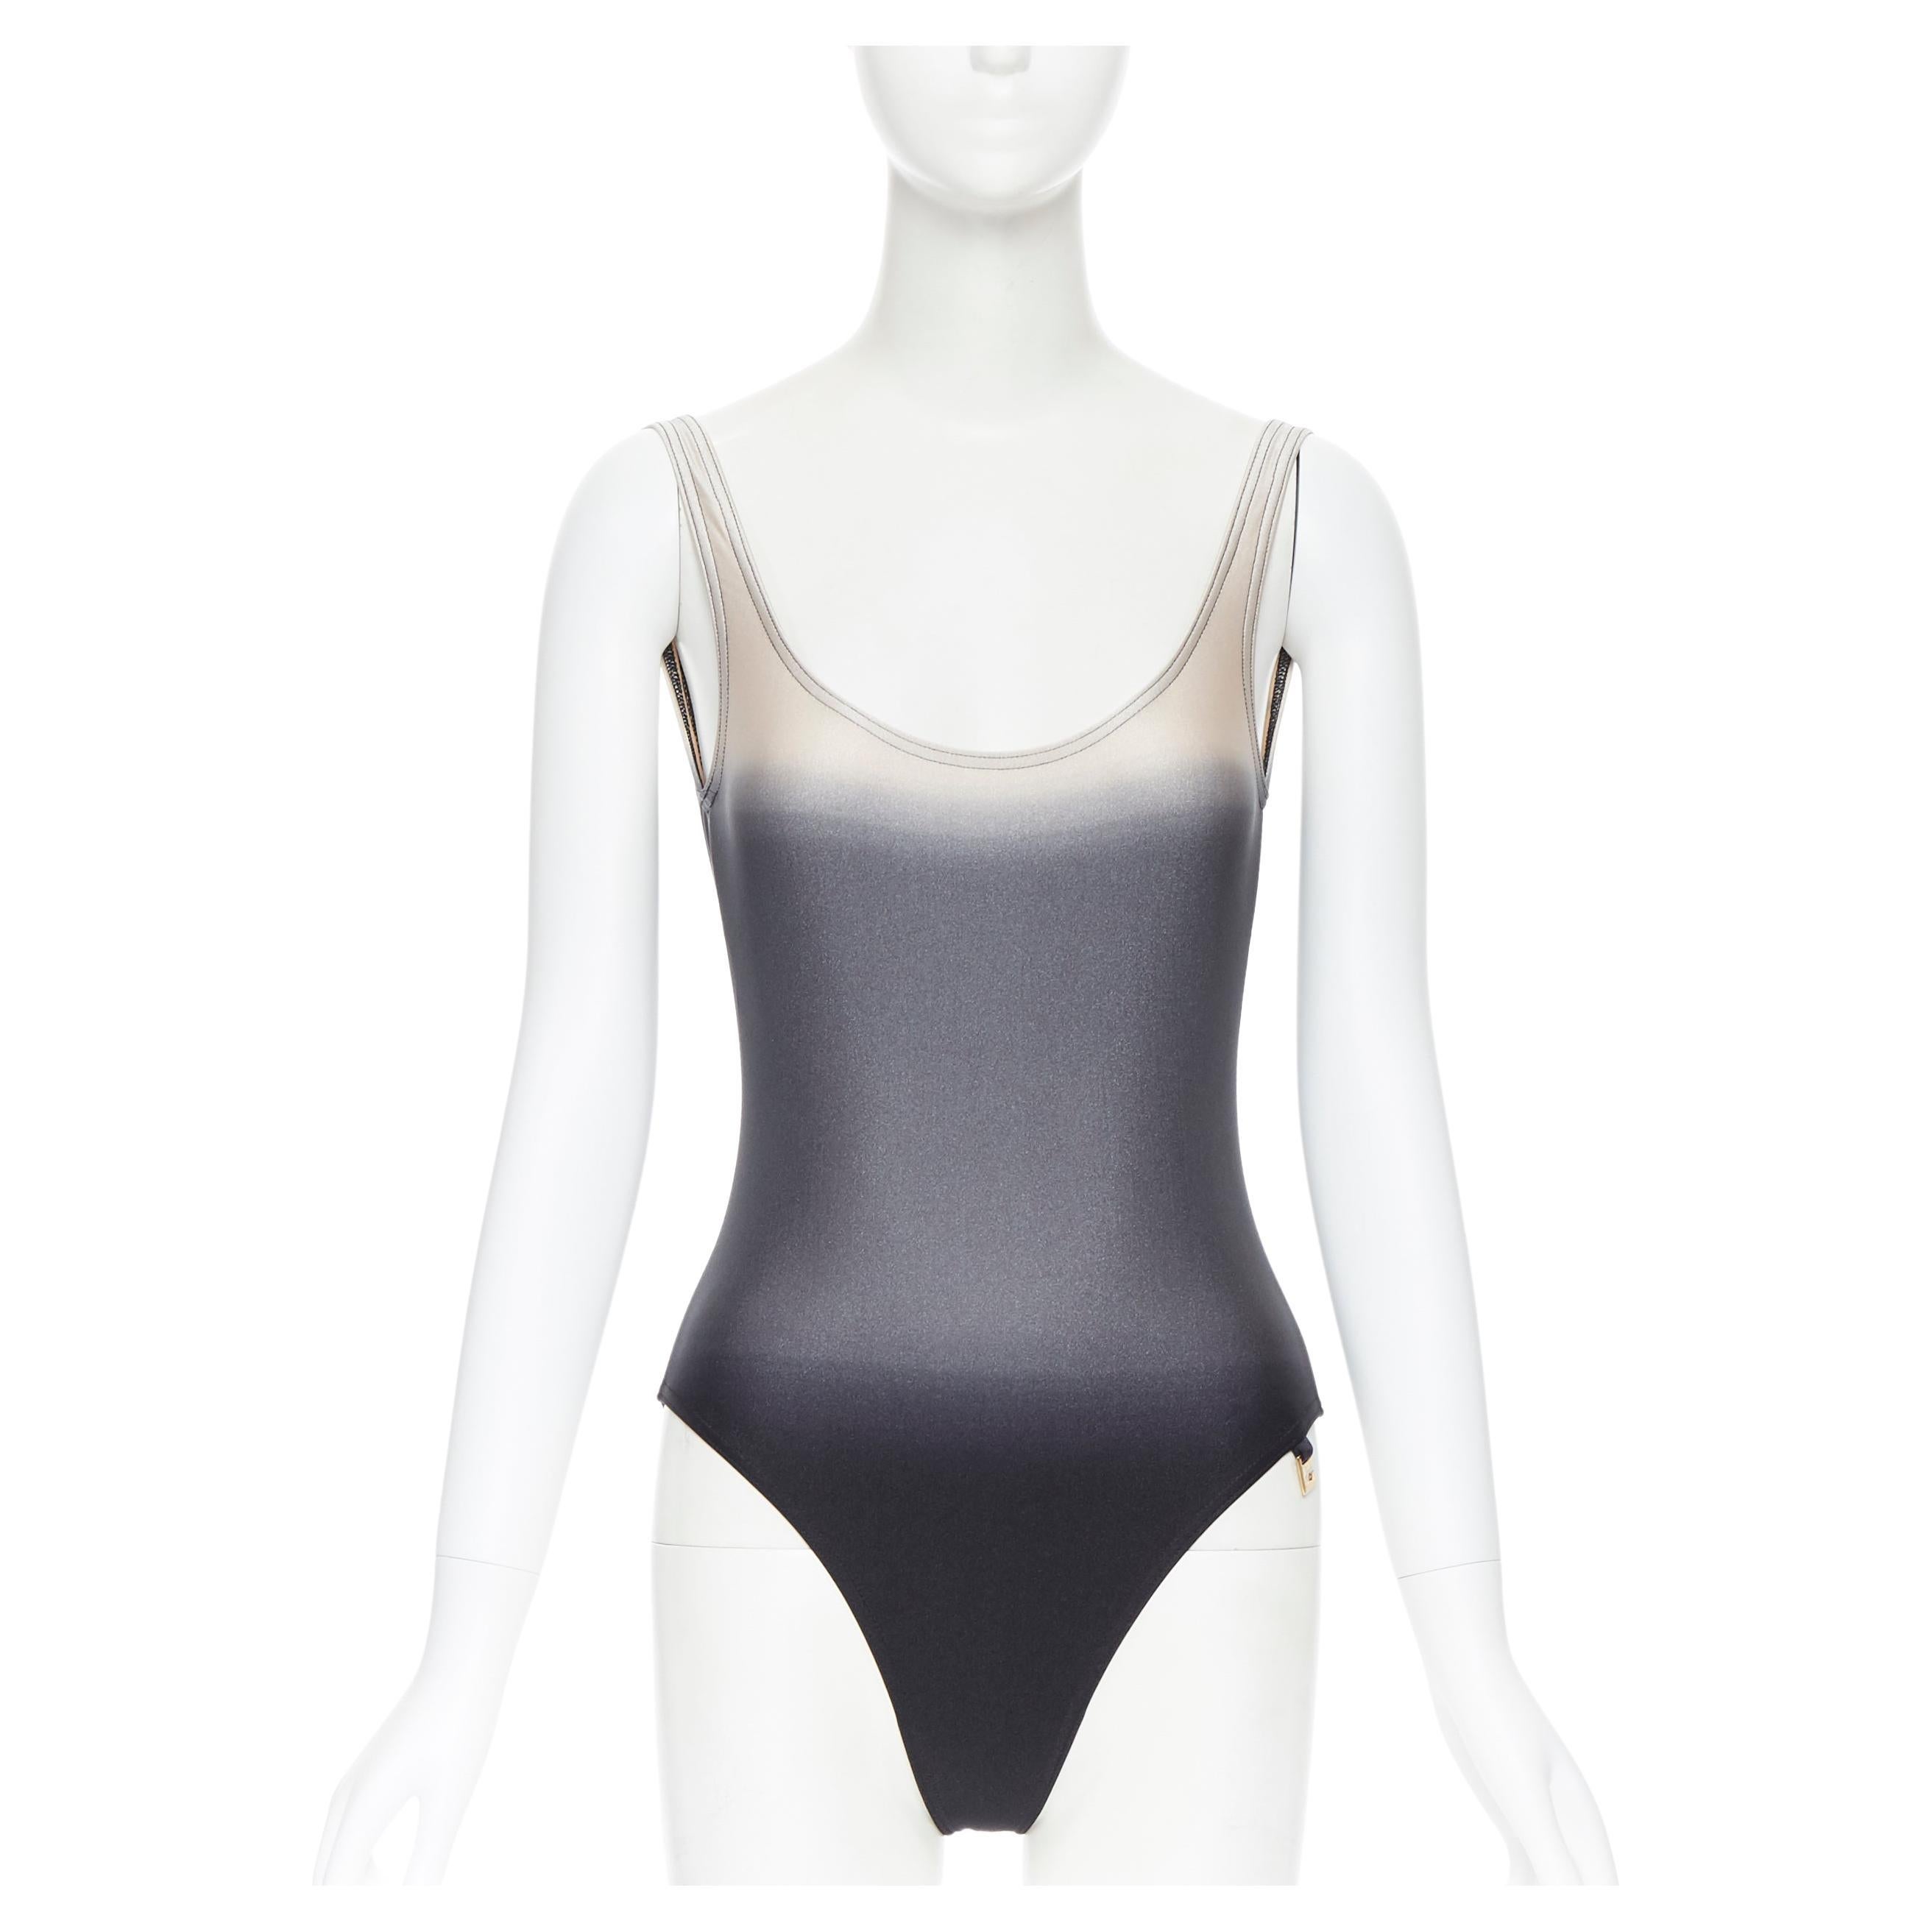 Gucci Tom Ford Ombre Gradient Scoop Back Swimsuit Body Top